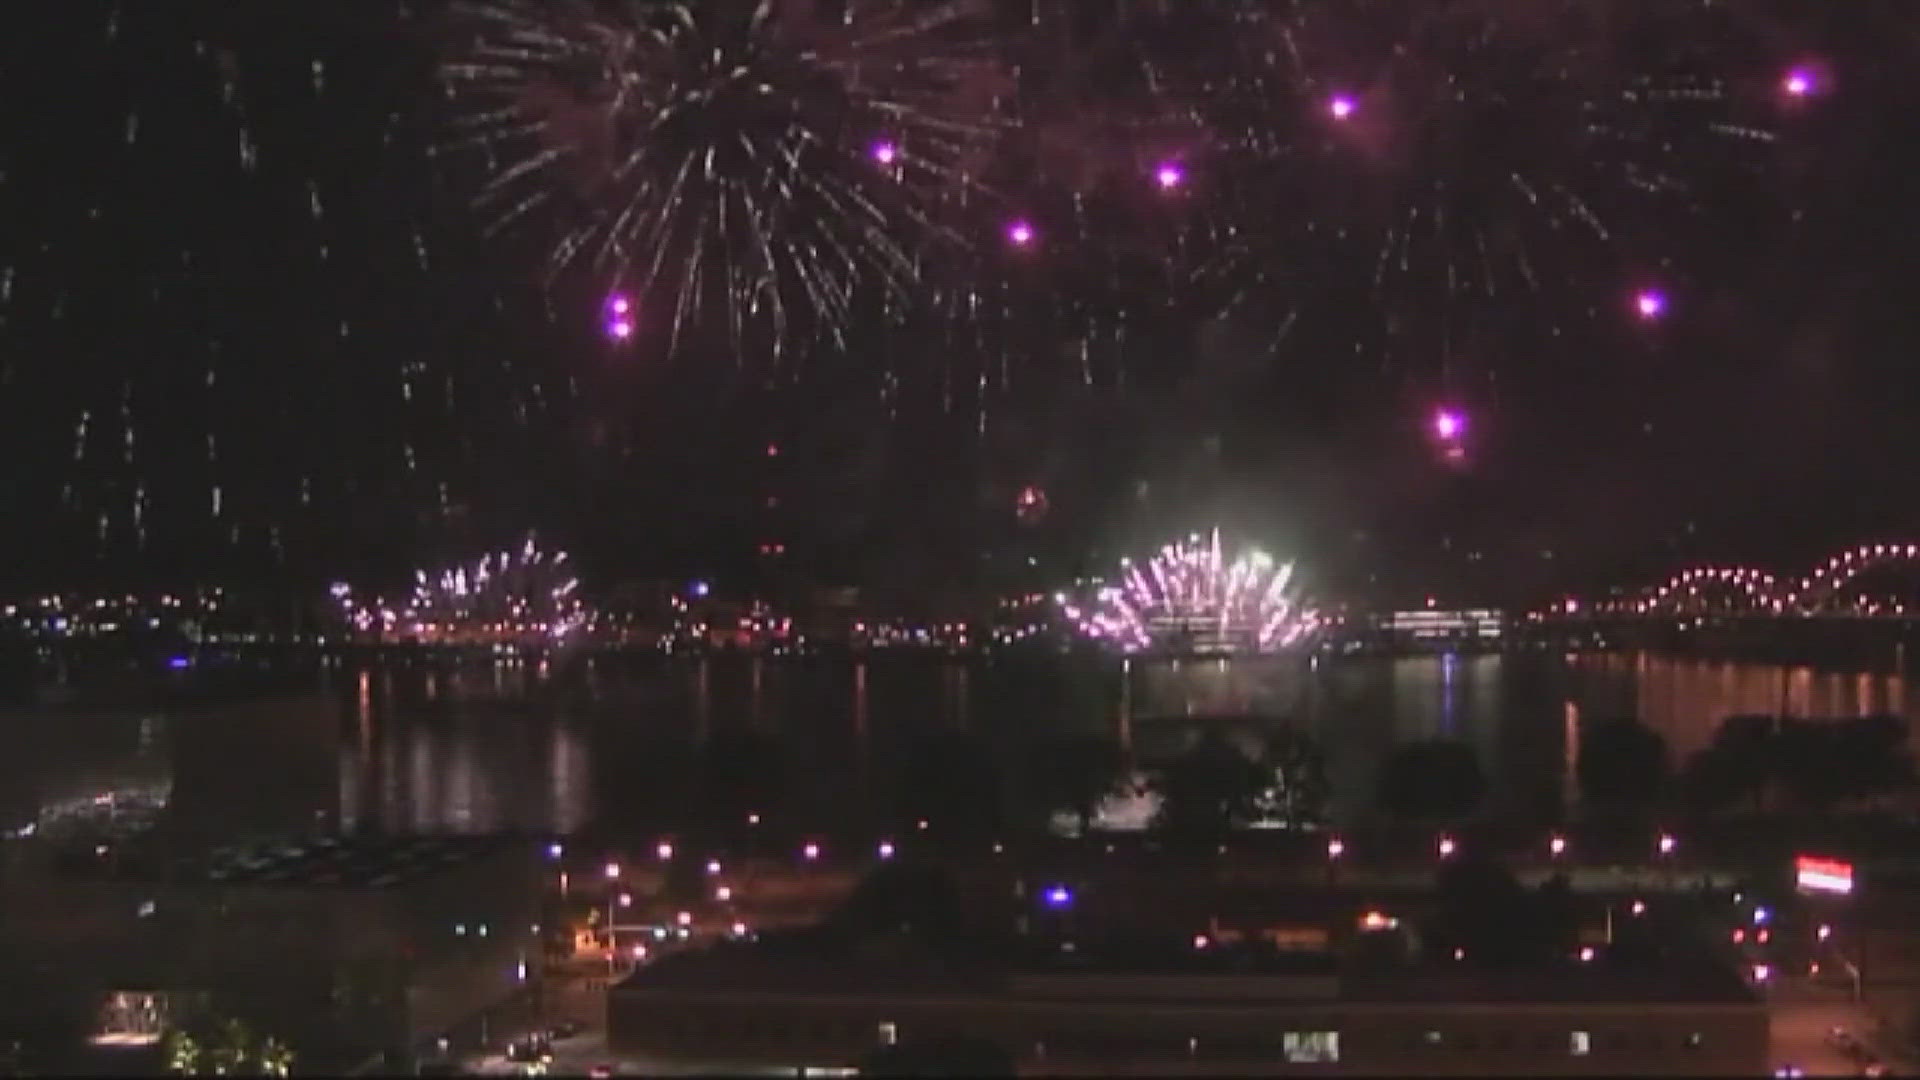 The Quad Cities region's biggest fireworks show was postponed from July 3 due to flooding on the Mississippi River.